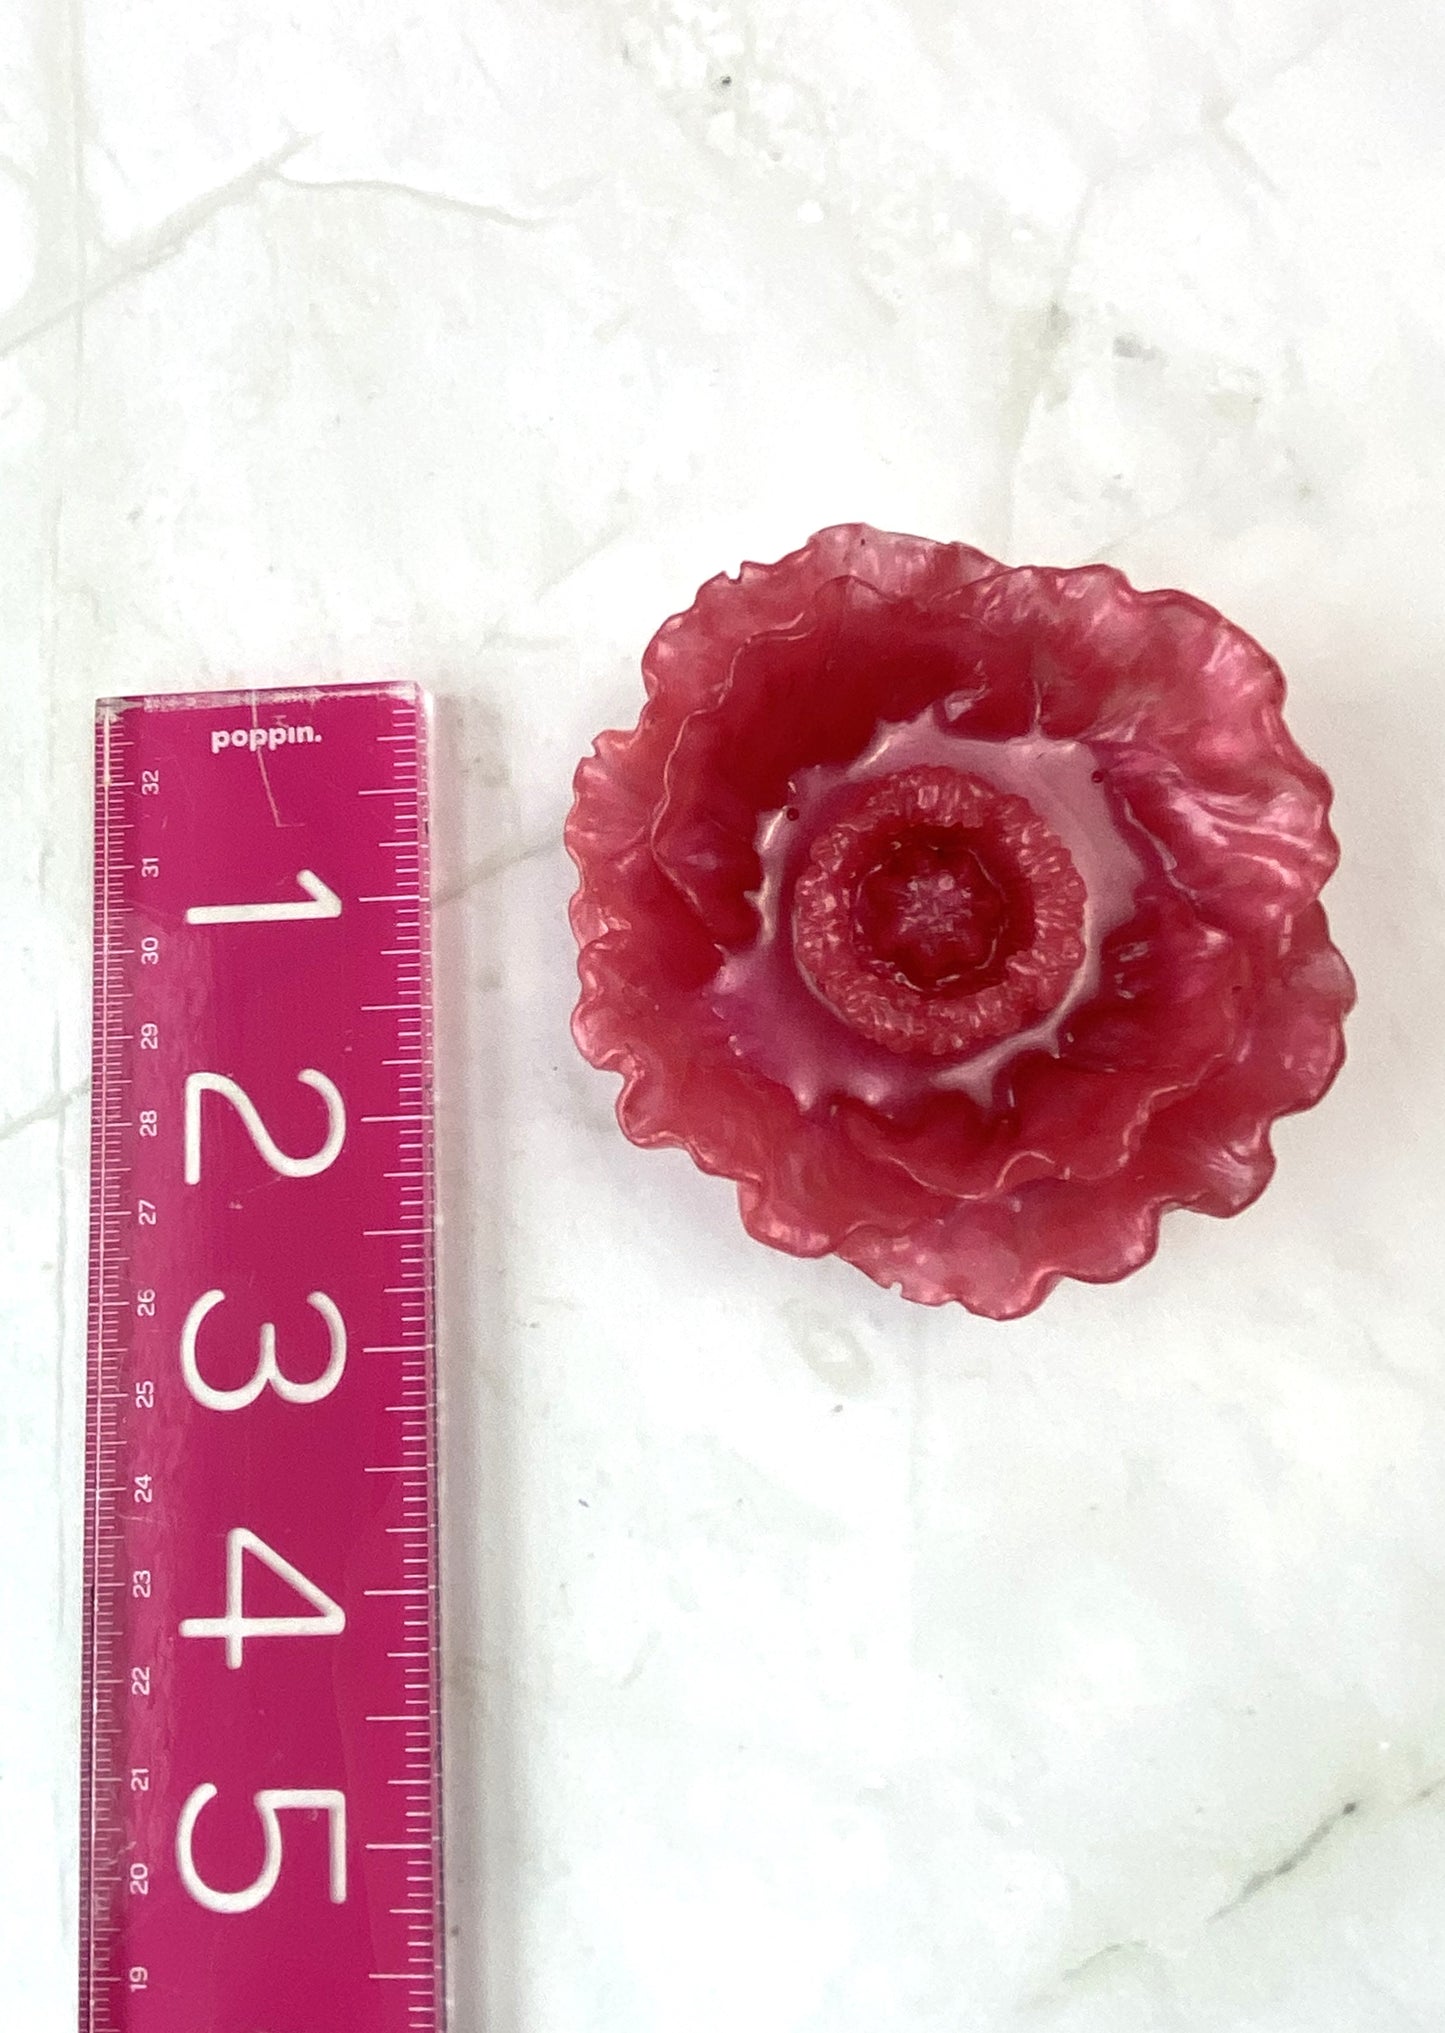 Red Pink Poppy Flower Ring Dish | Handmade Home Décor